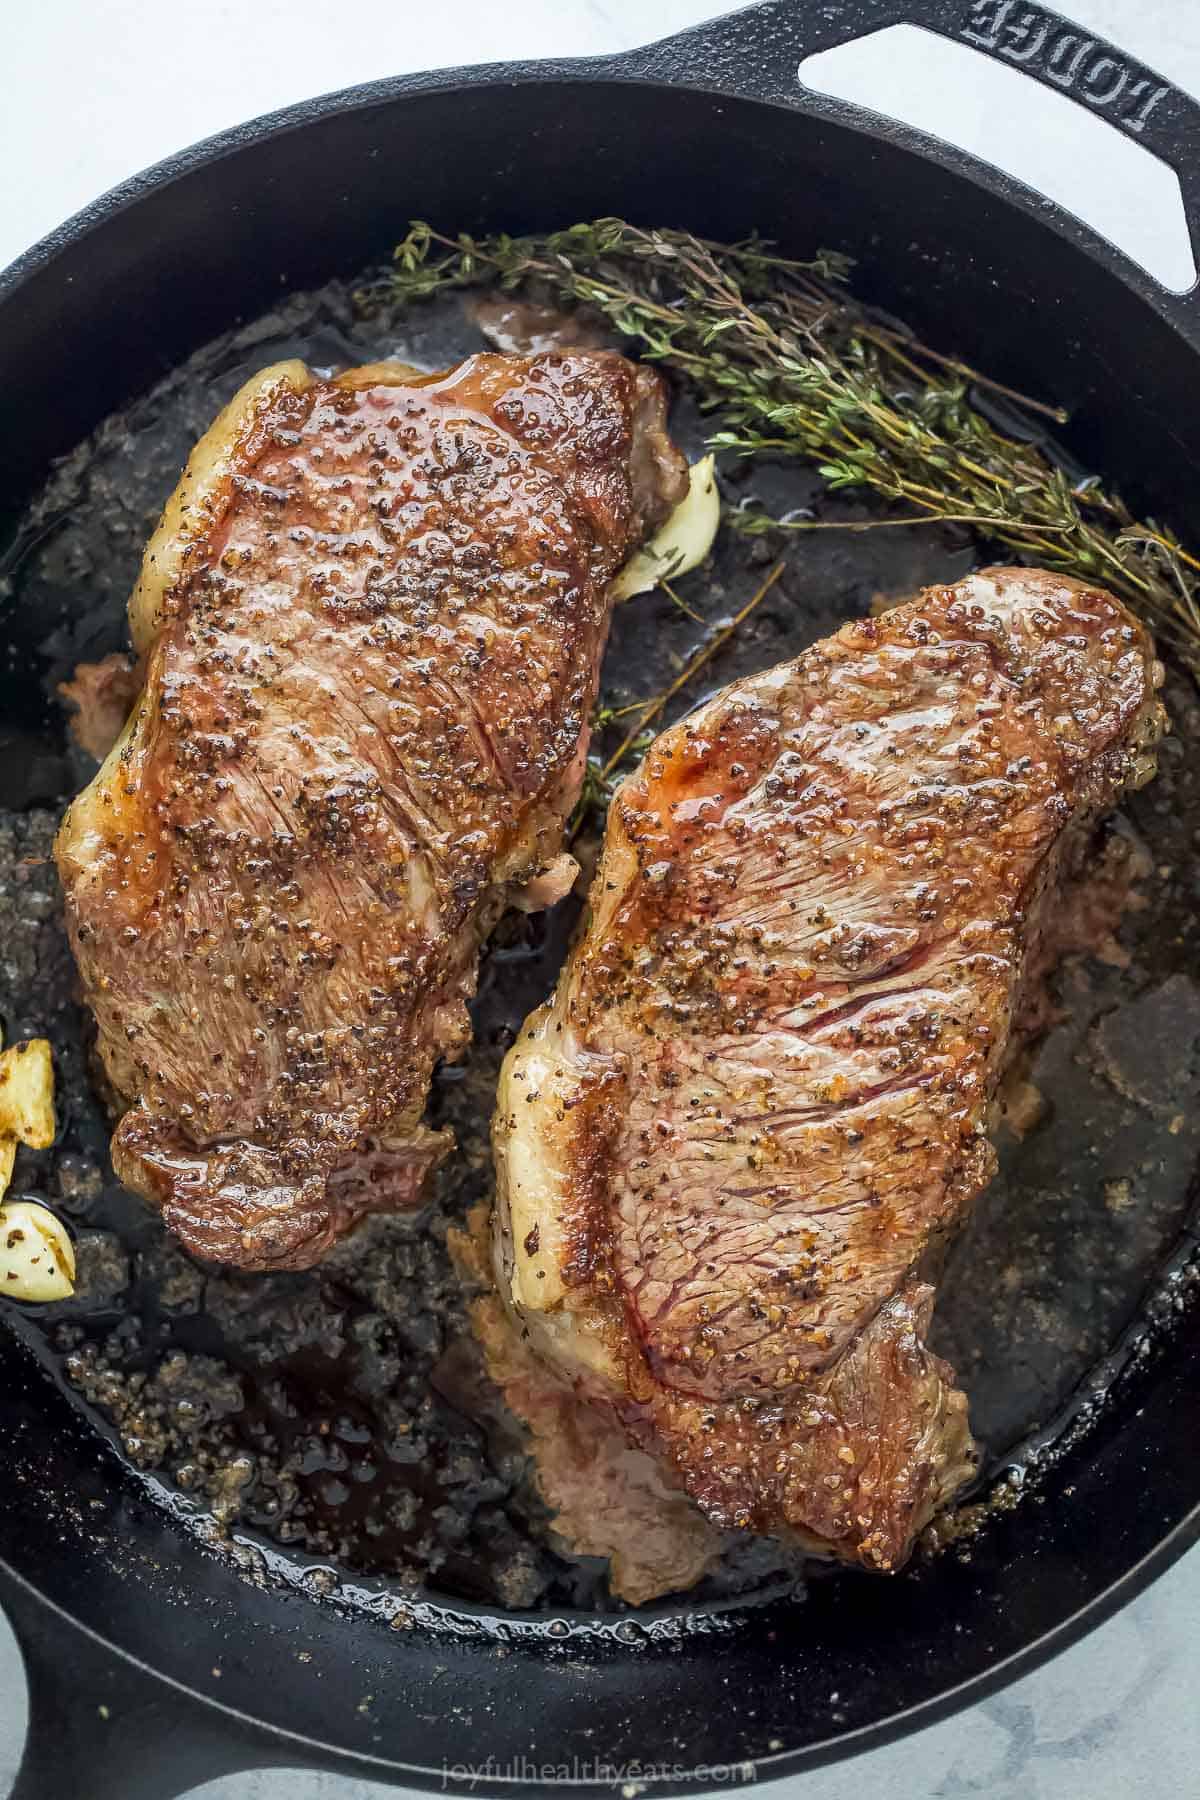 Place steak in skillet and add melted butter, garlic and thyme.